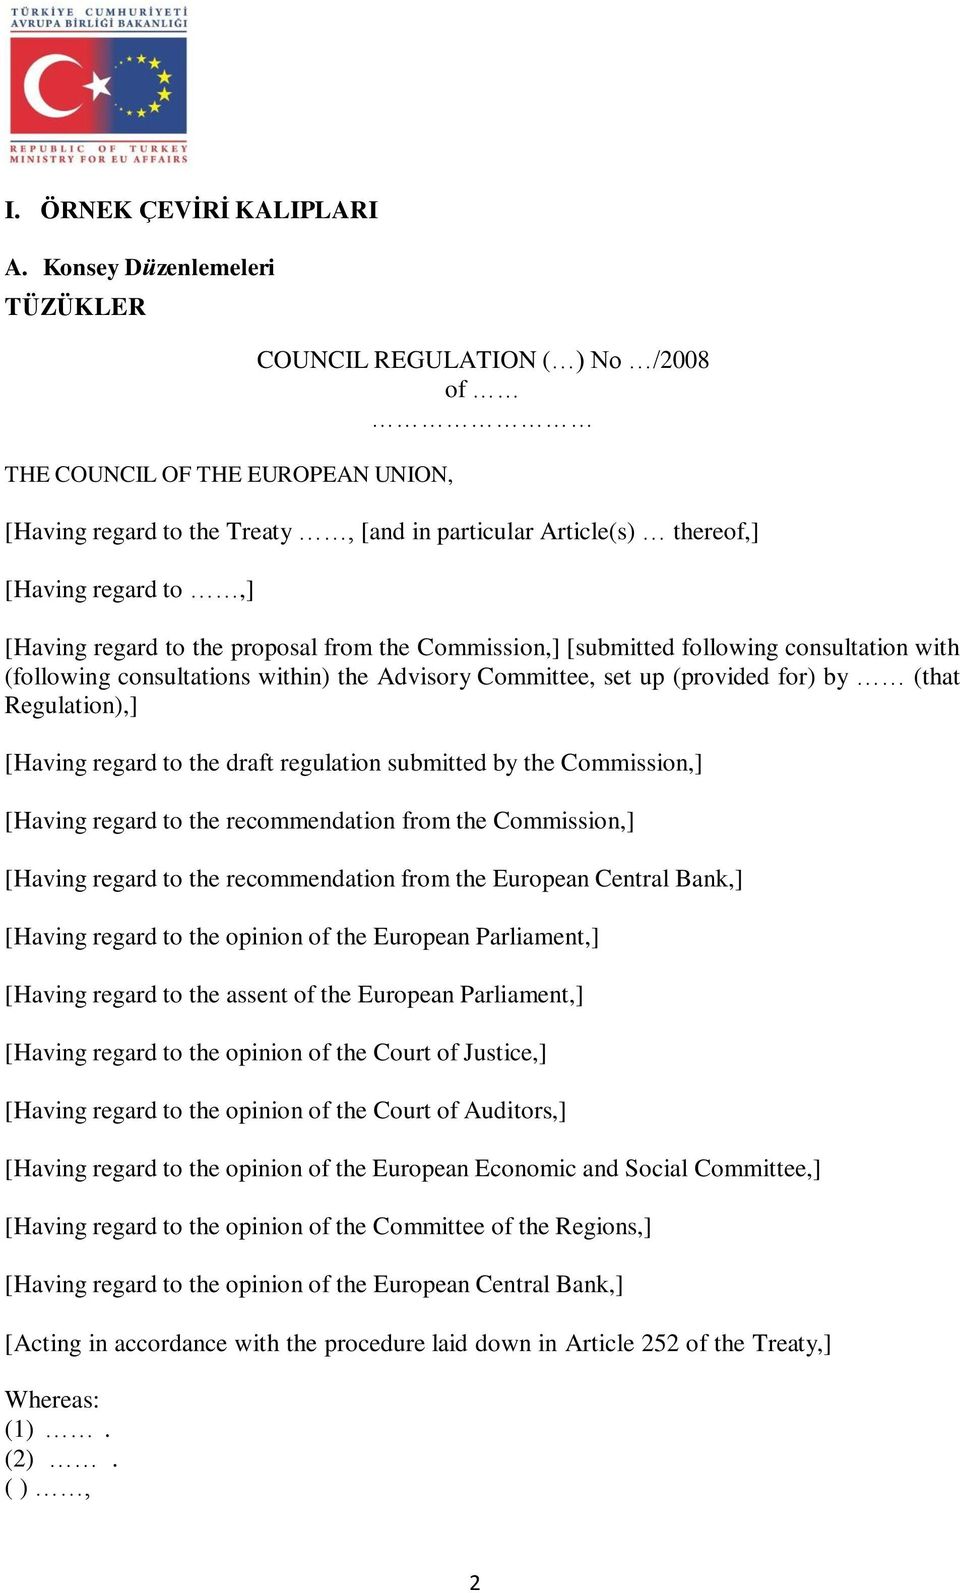 regard to the proposal from the Commission,] [submitted following consultation with (following consultations within) the Advisory Committee, set up (provided for) by (that Regulation),] [Having